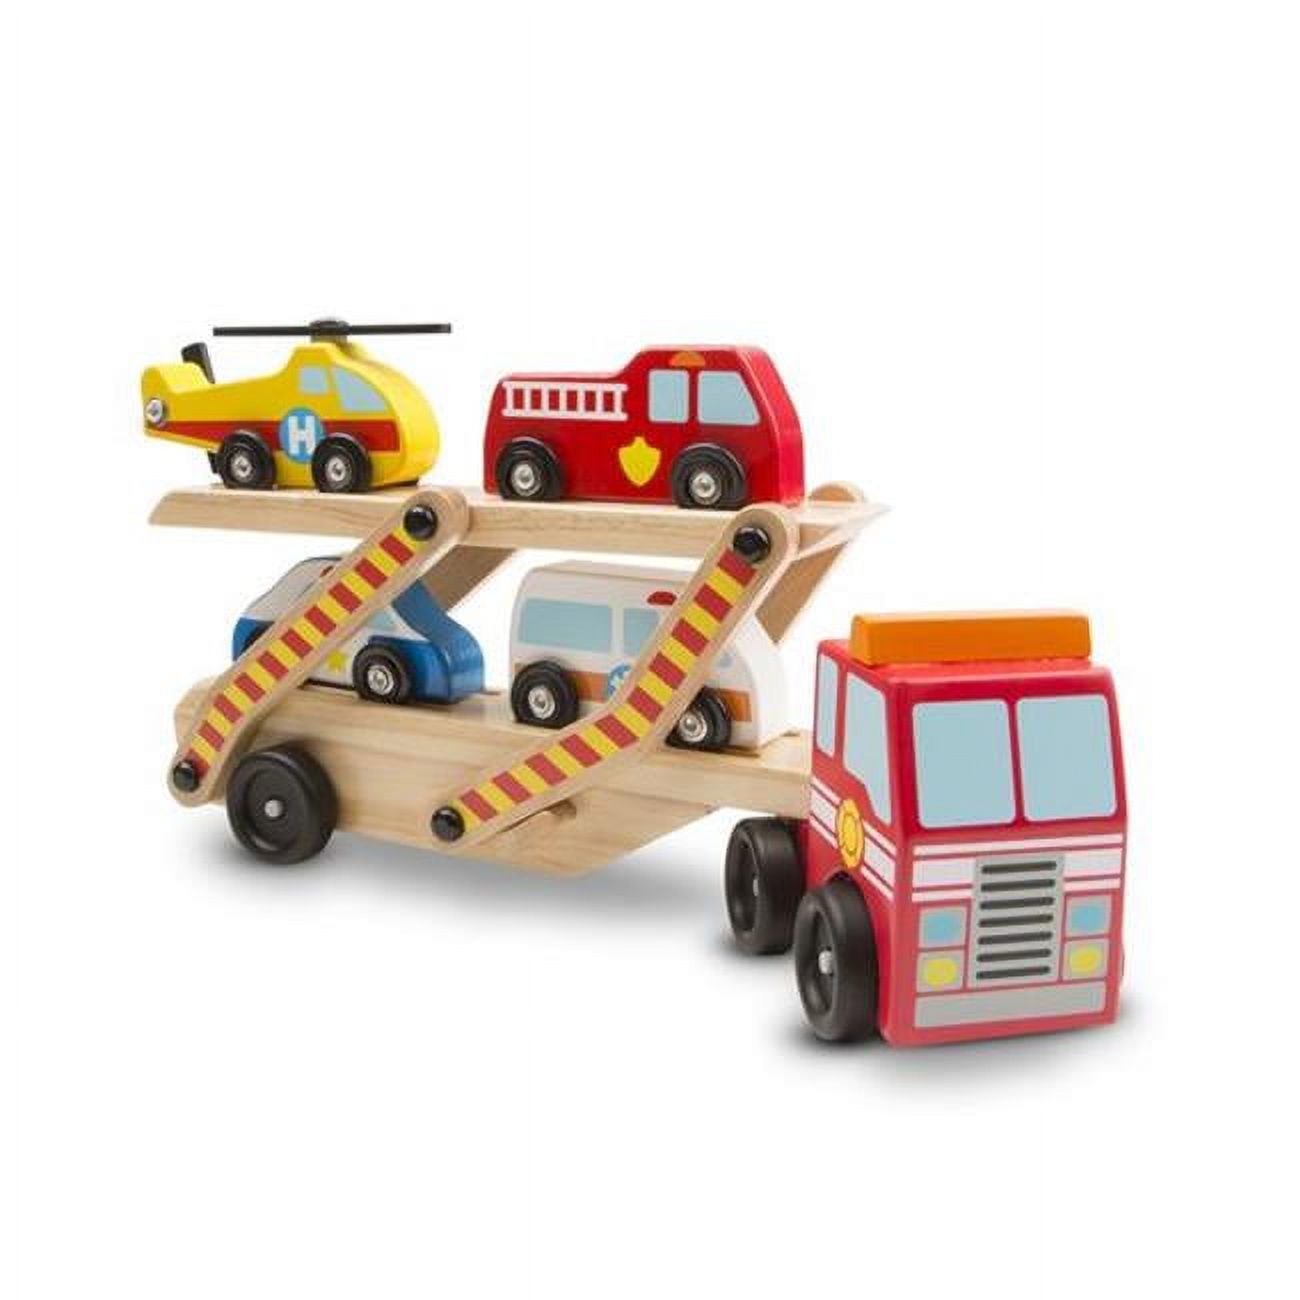 Emergency Vehicle Carrier Wooden Play Set - image 1 of 1